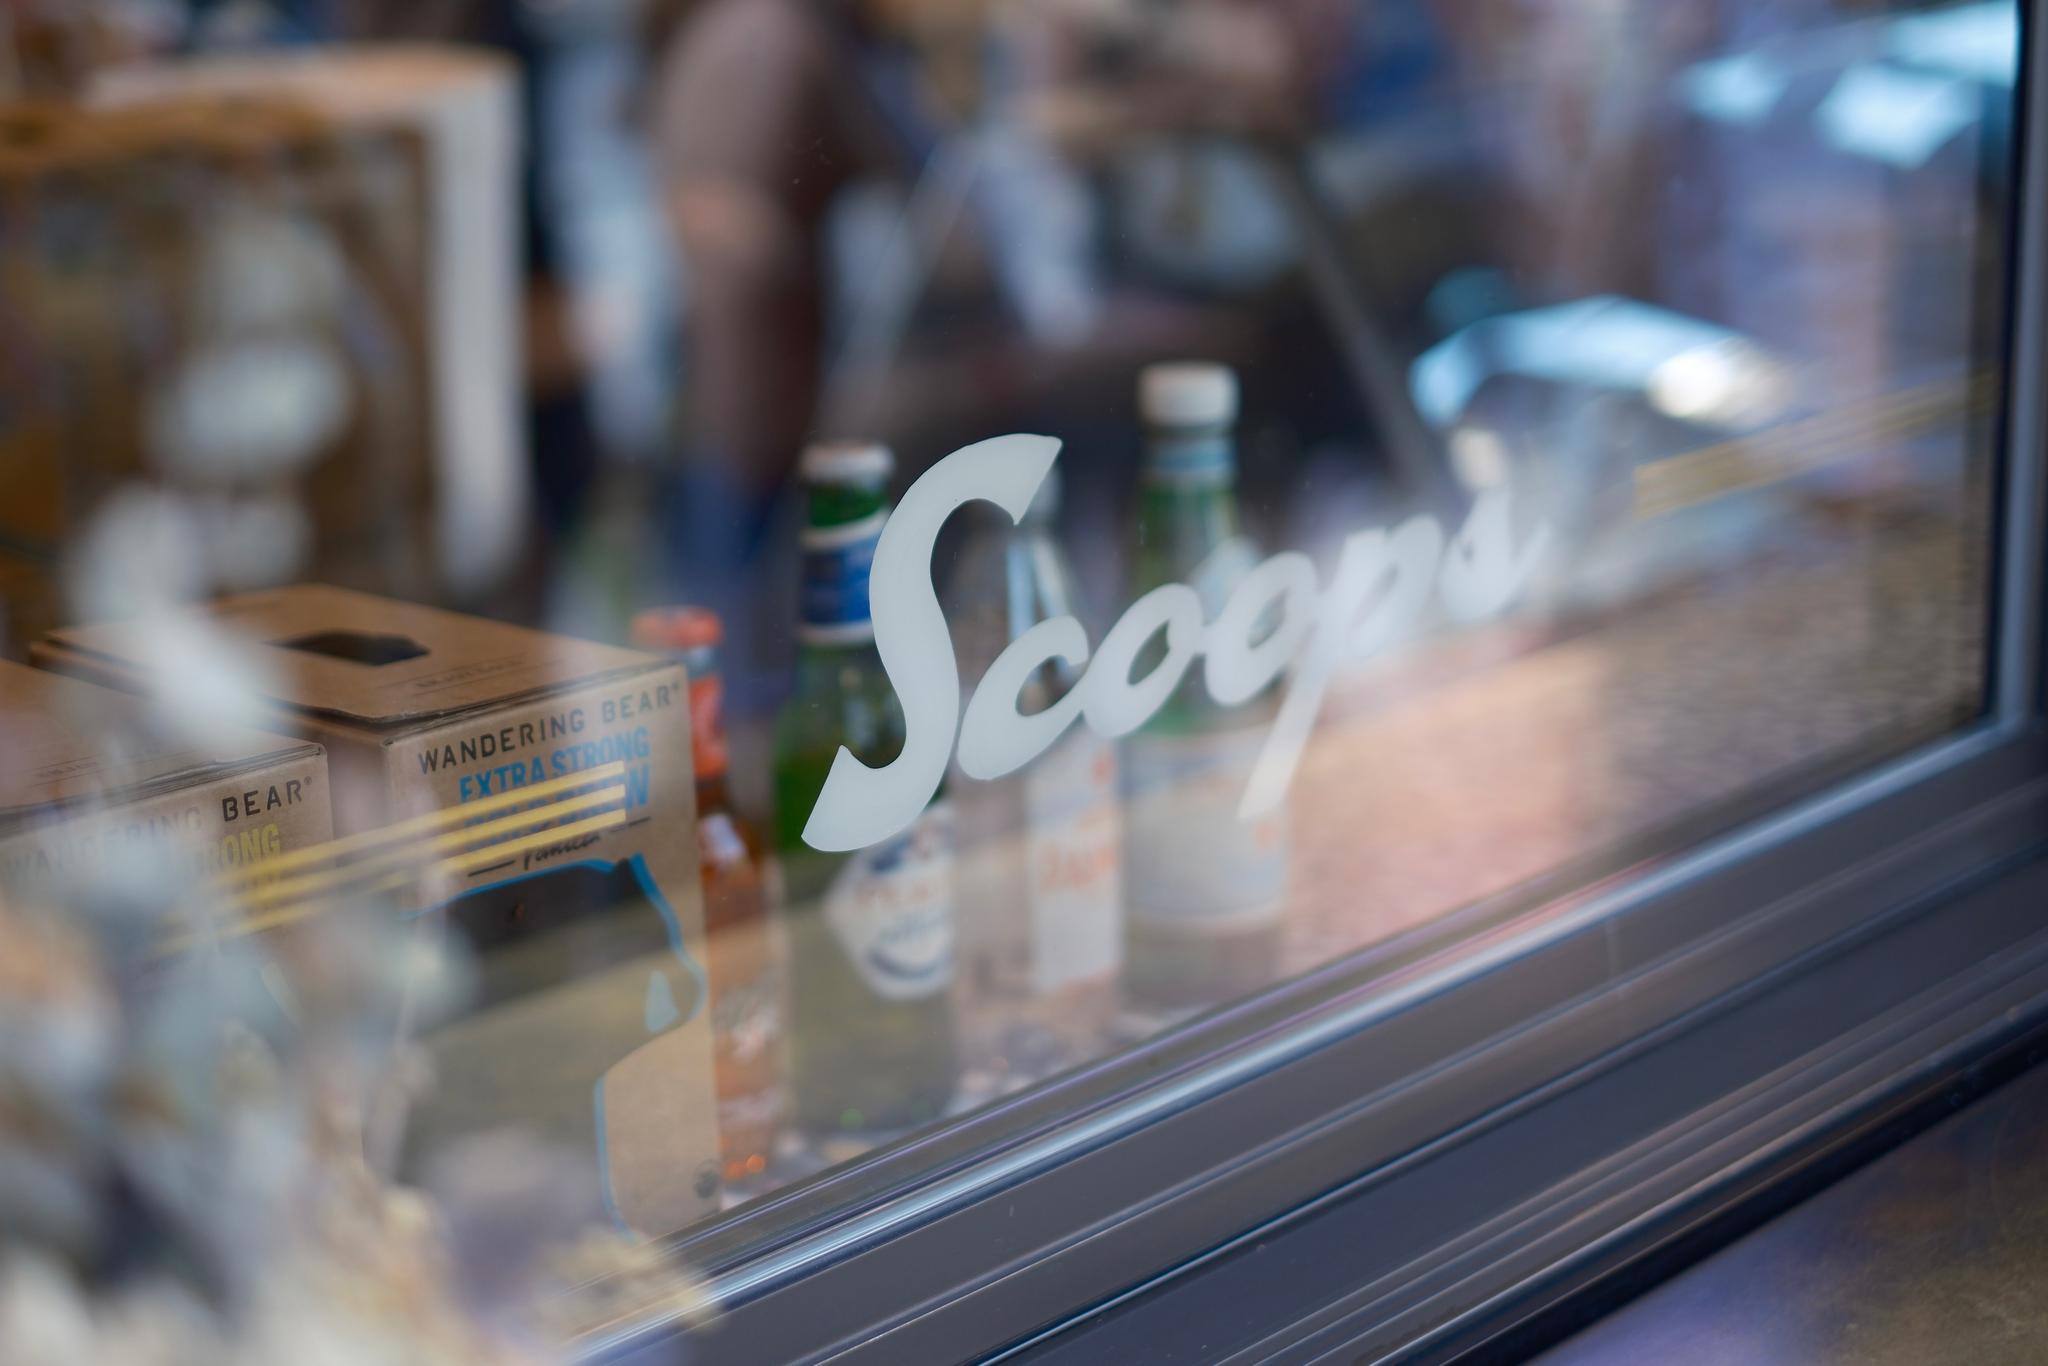 A window with the word Scoops written on it, reflecting a blurred interior scene with bottles and other items visible inside